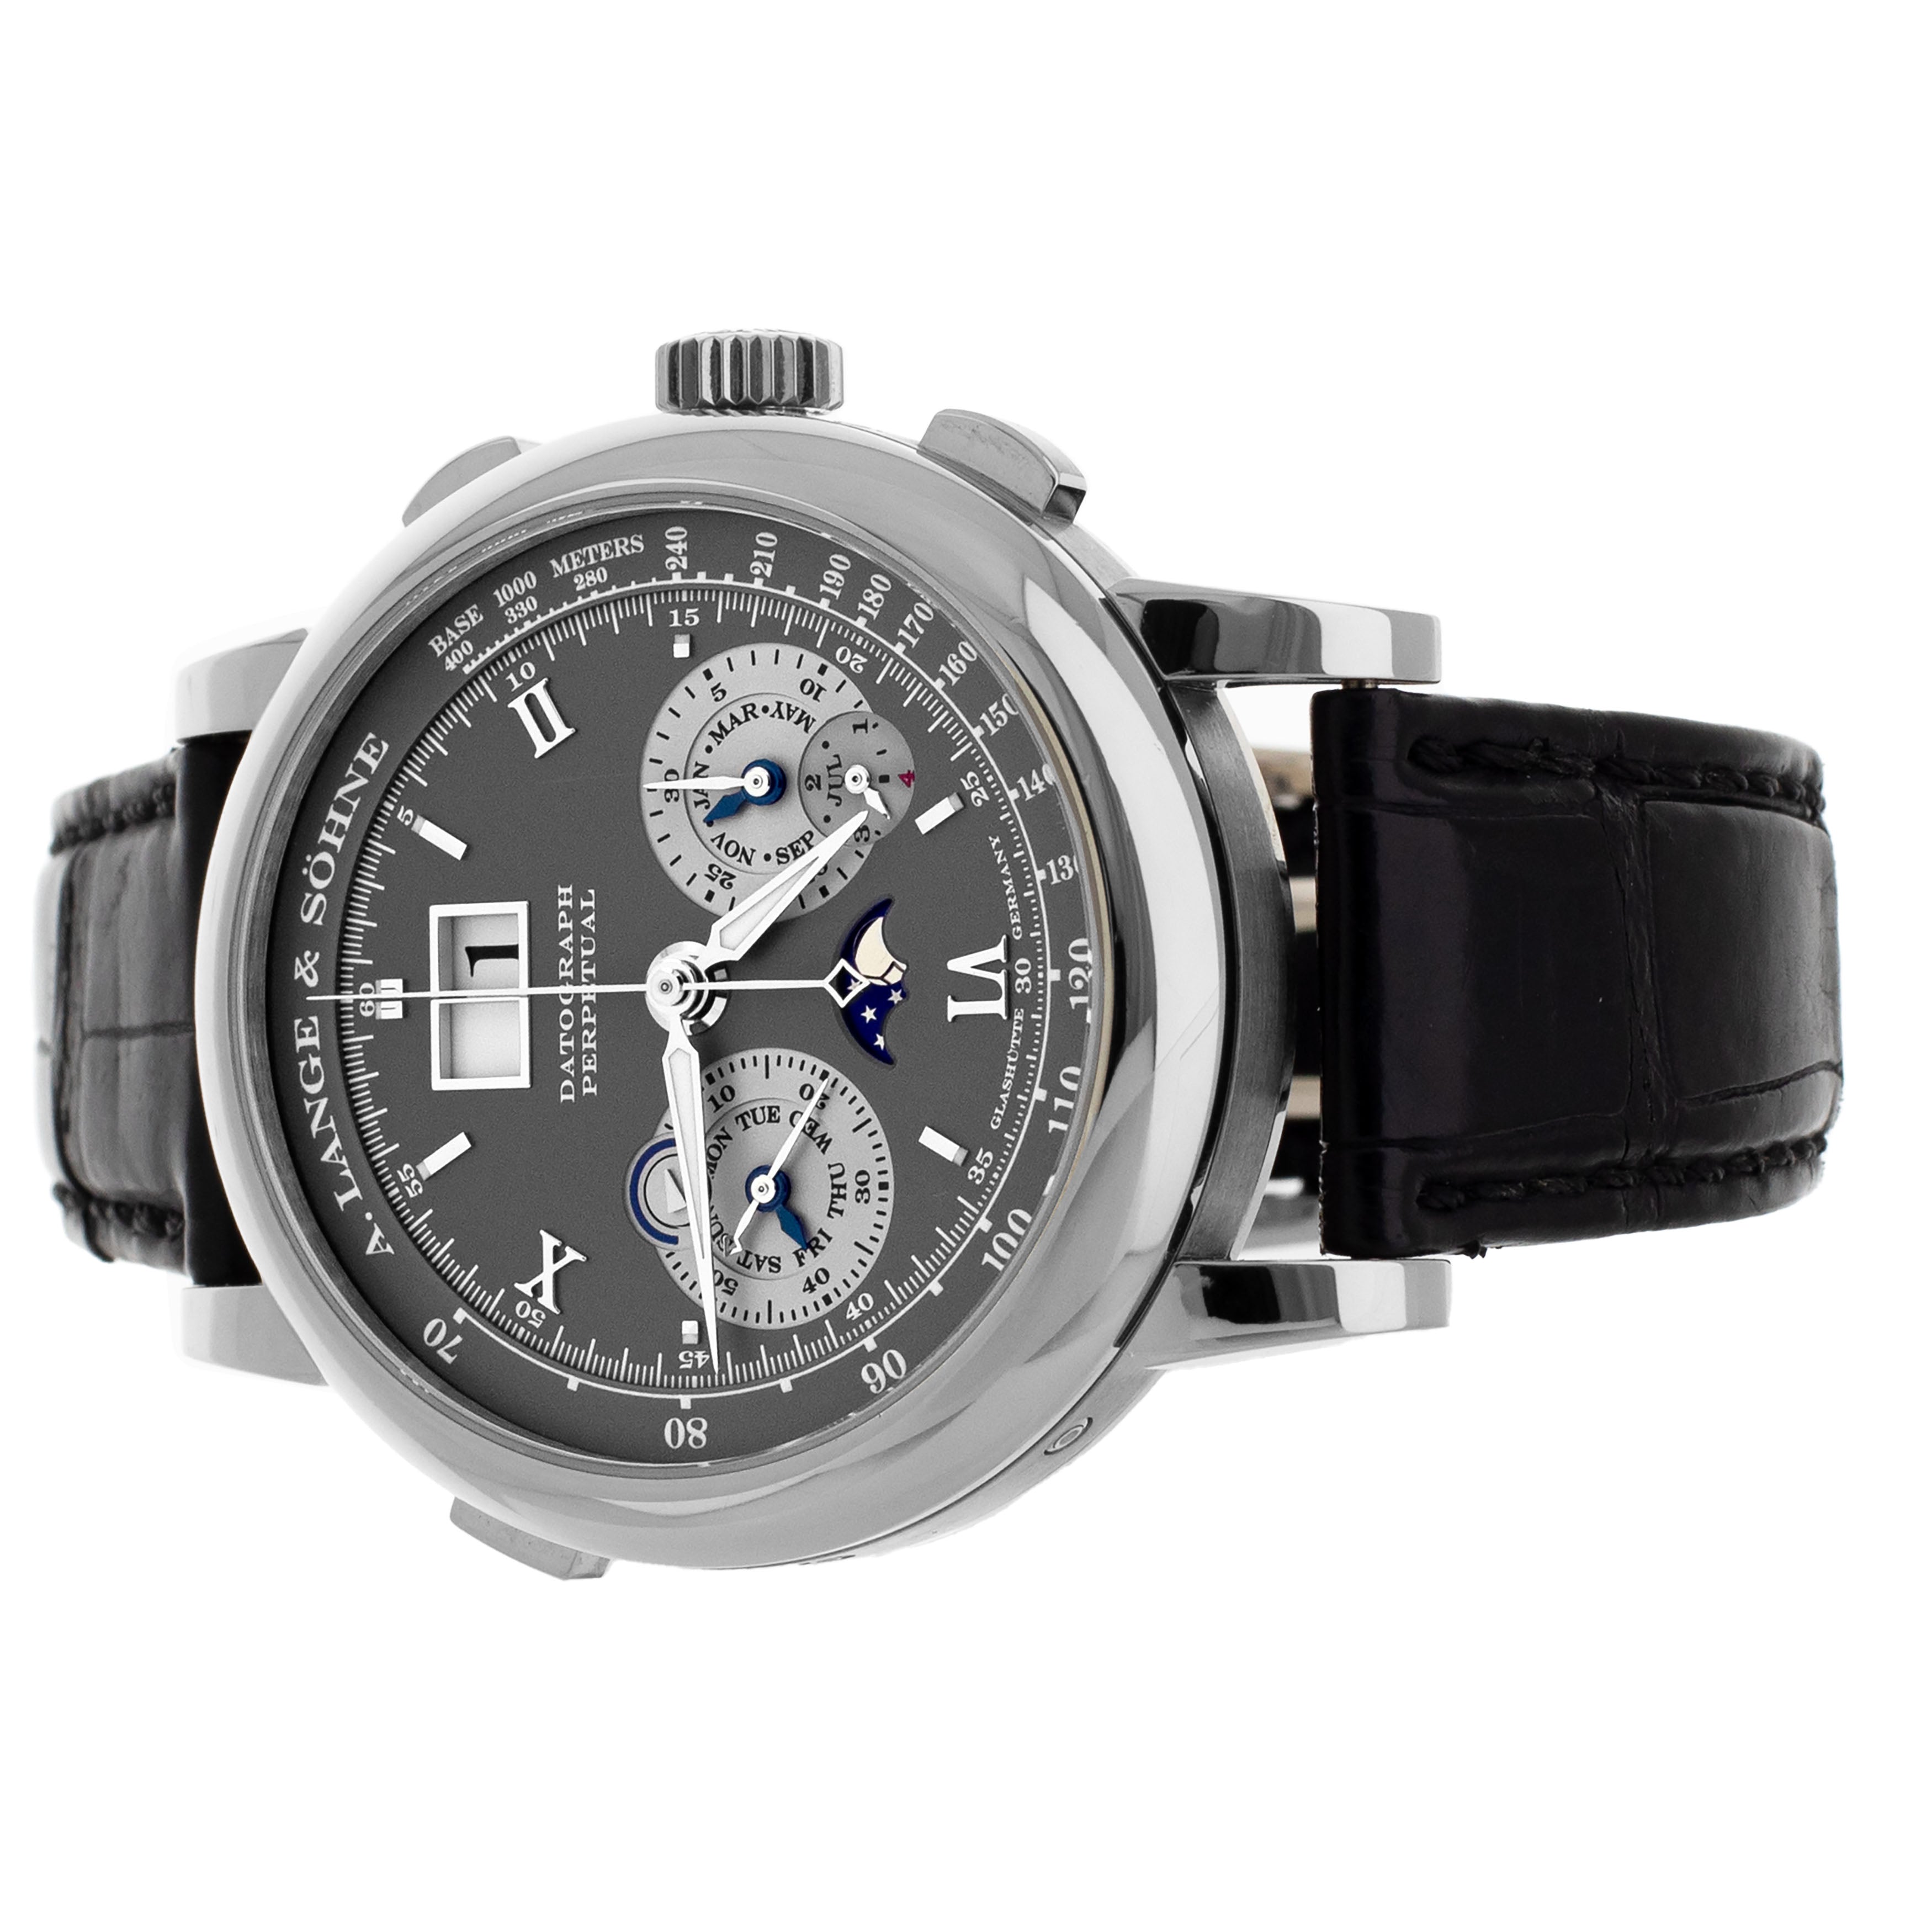 A. Lange & Sohne Datograph Perpetual White Gold Gray Dial 41mm 410.030 Full Set